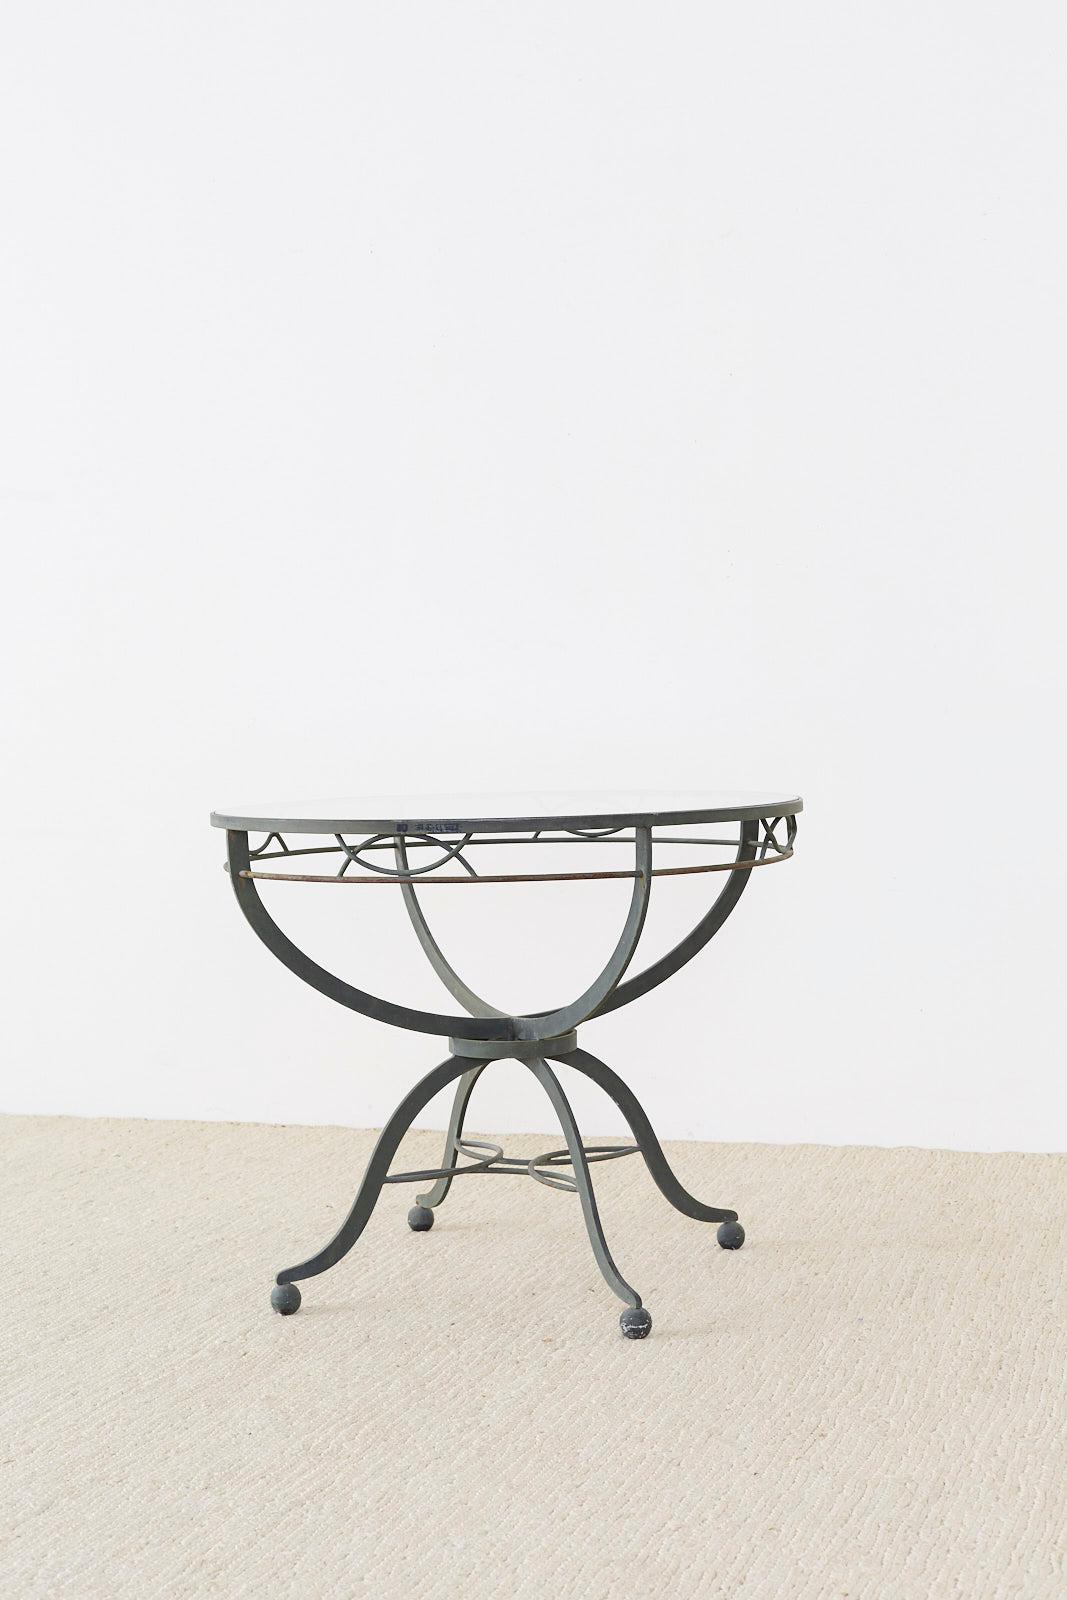 Midcentury French Neoclassical Style Iron Garden Dining Table 7